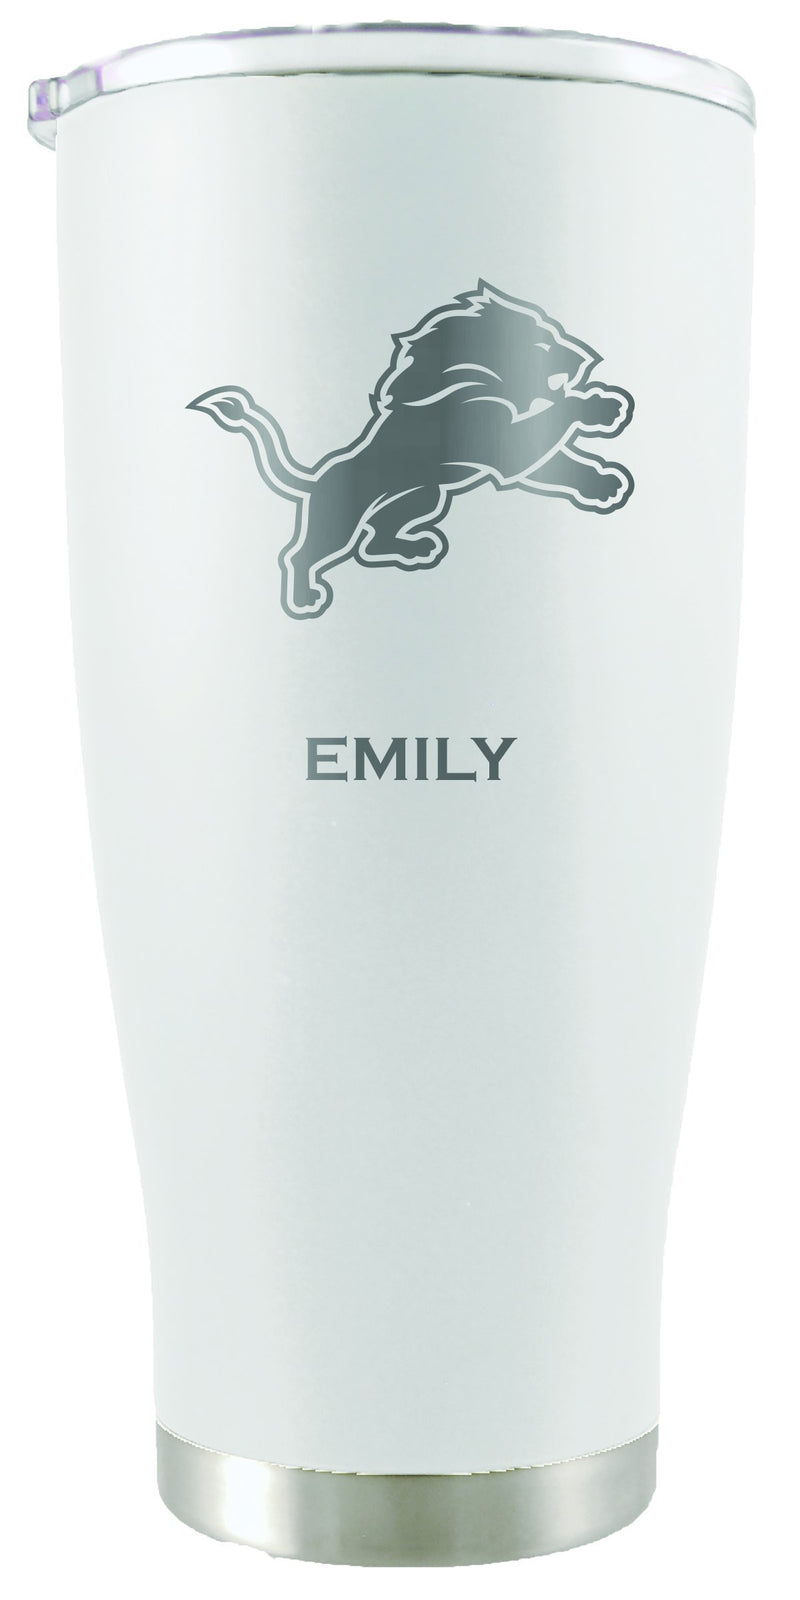 20oz White Personalized Stainless Steel Tumbler | Detriot Lions
CurrentProduct, Detroit Lions, DLI, Drinkware_category_All, NFL, Personalized_Personalized, Stainless Steel
The Memory Company